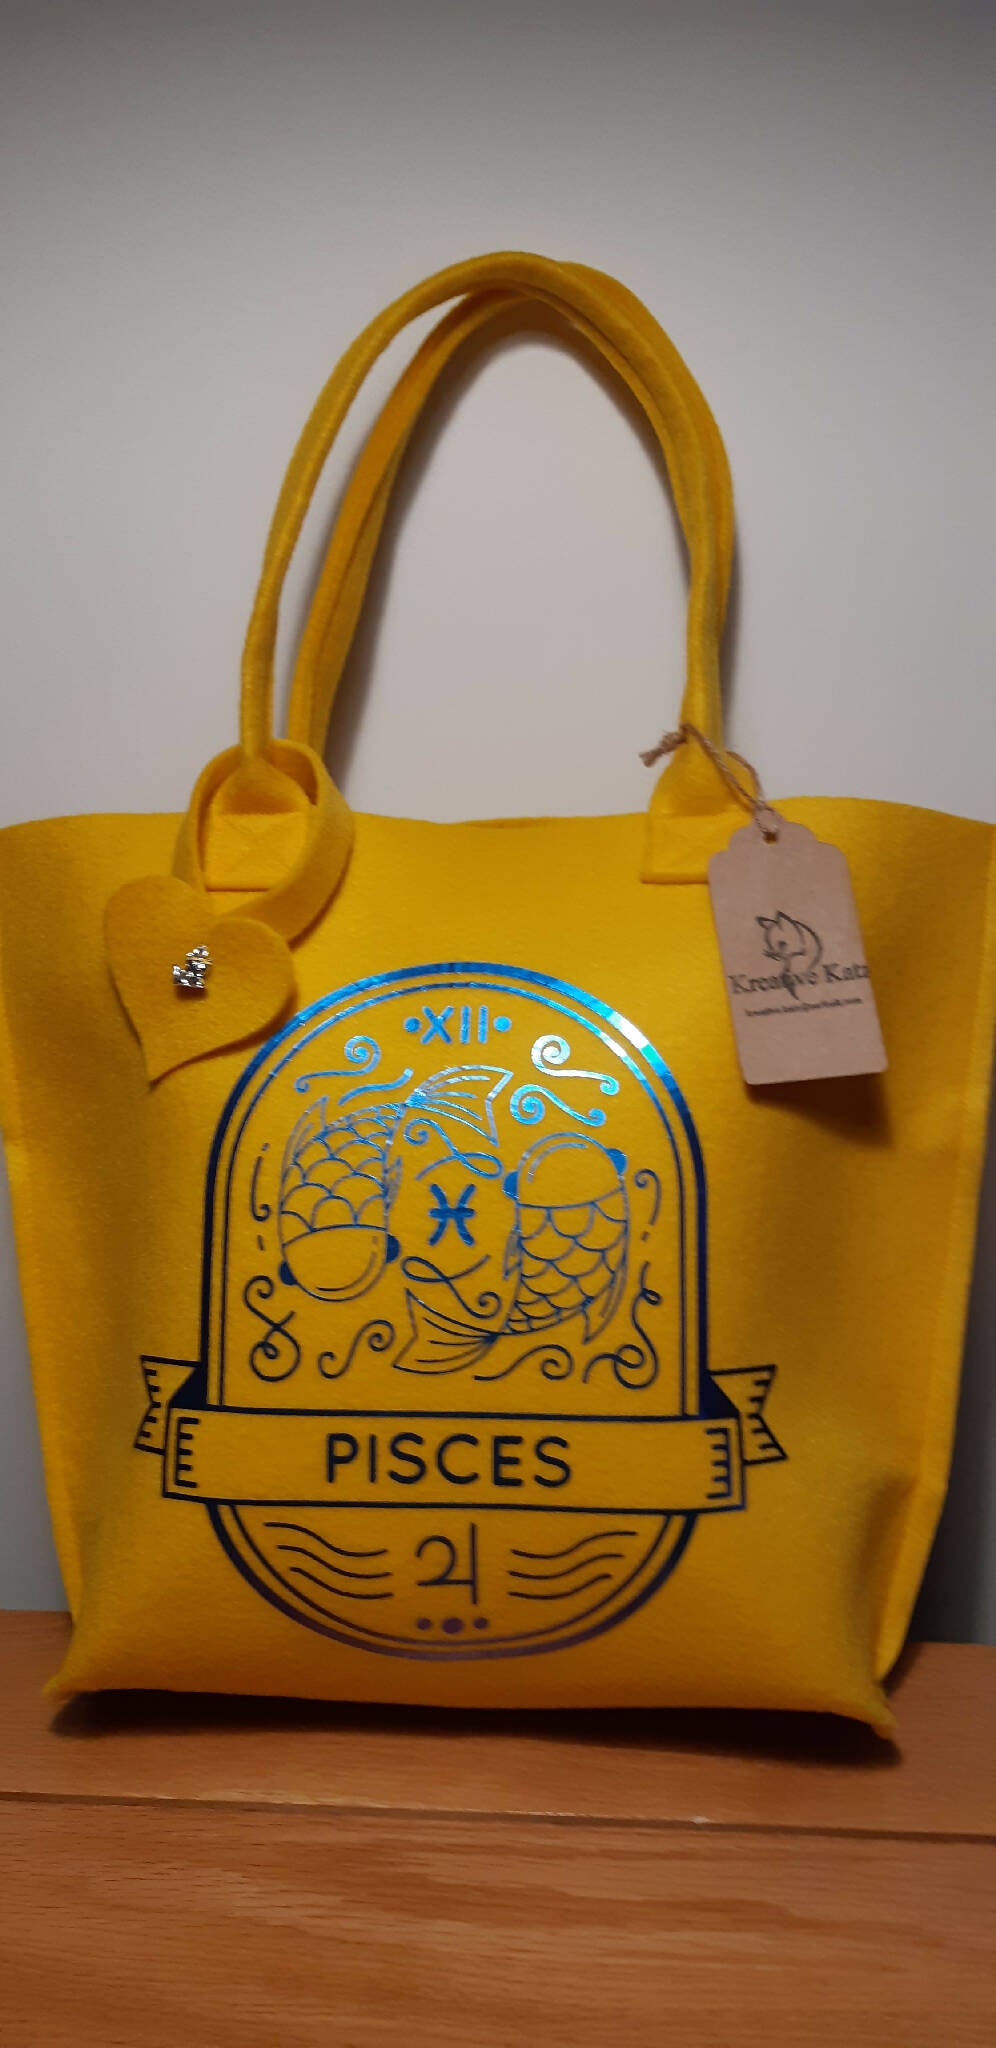 NEW! NEW! NEW! HOROSCOPE TOTE BAG MORE TO FOLLOW !!!!!